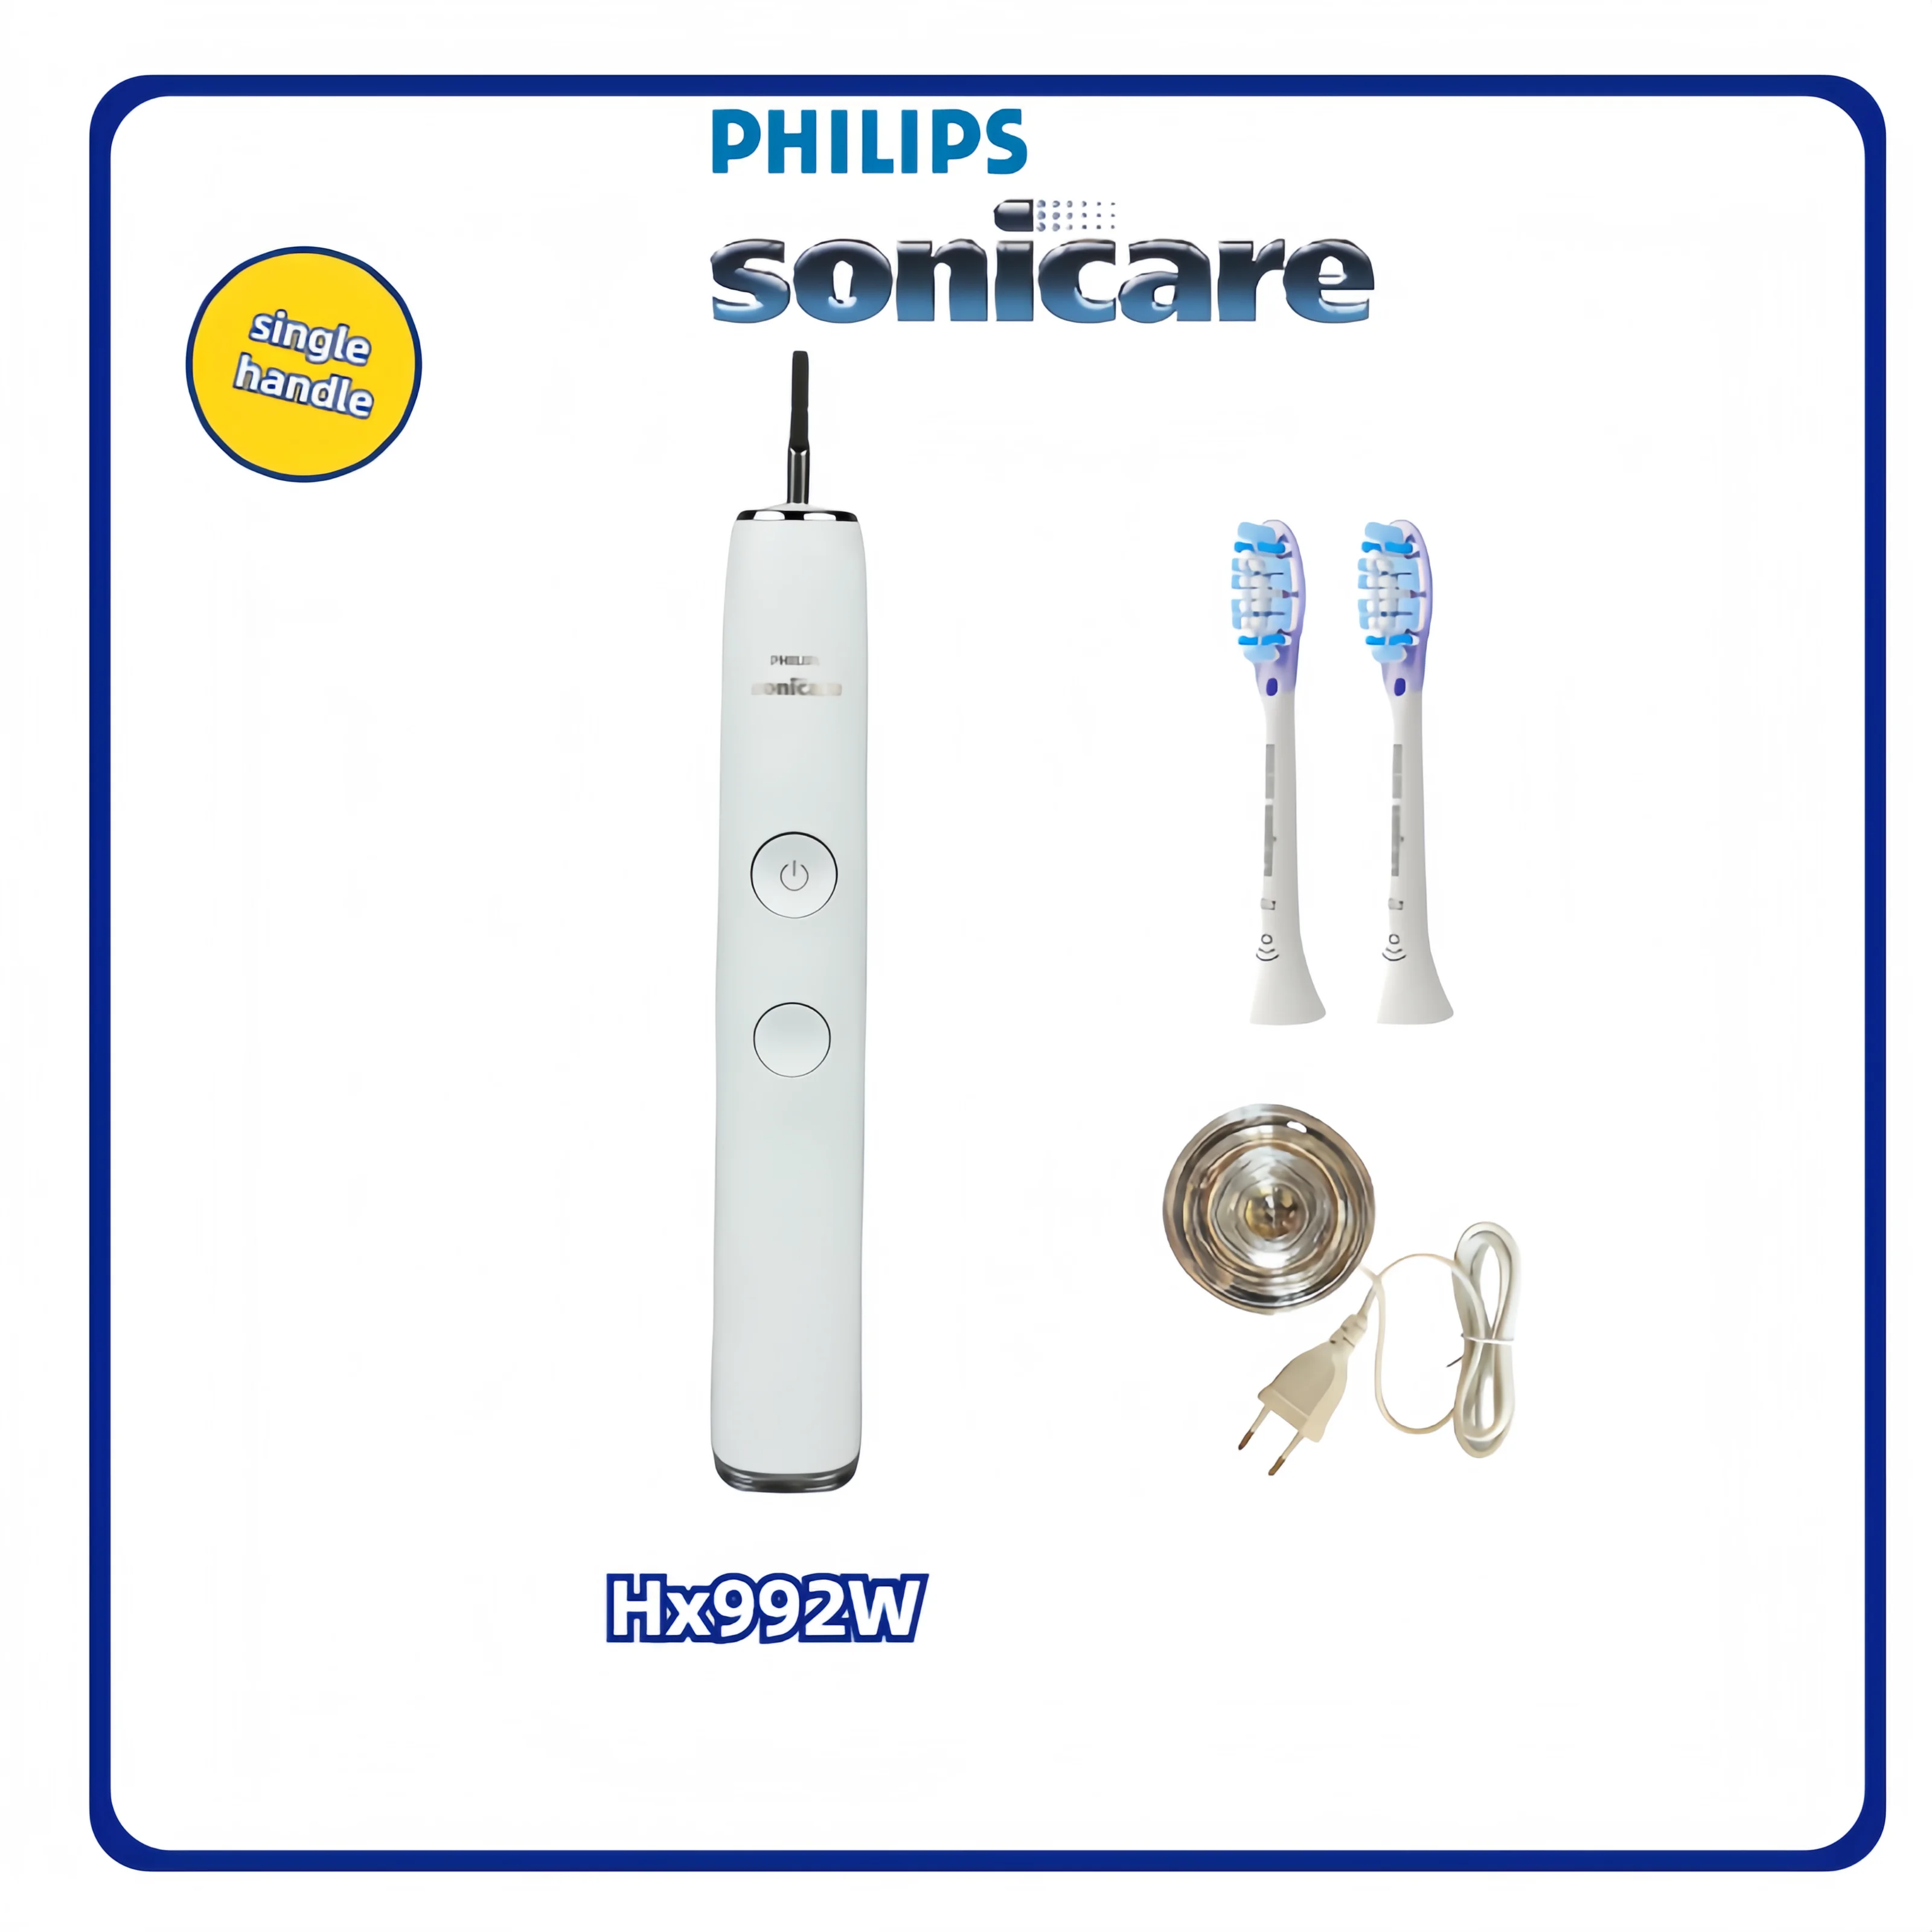 Philips Sonicare Electric Toothbrush With 2 Philips Brush Heads G3  New and Original Handle HX992W 4 models